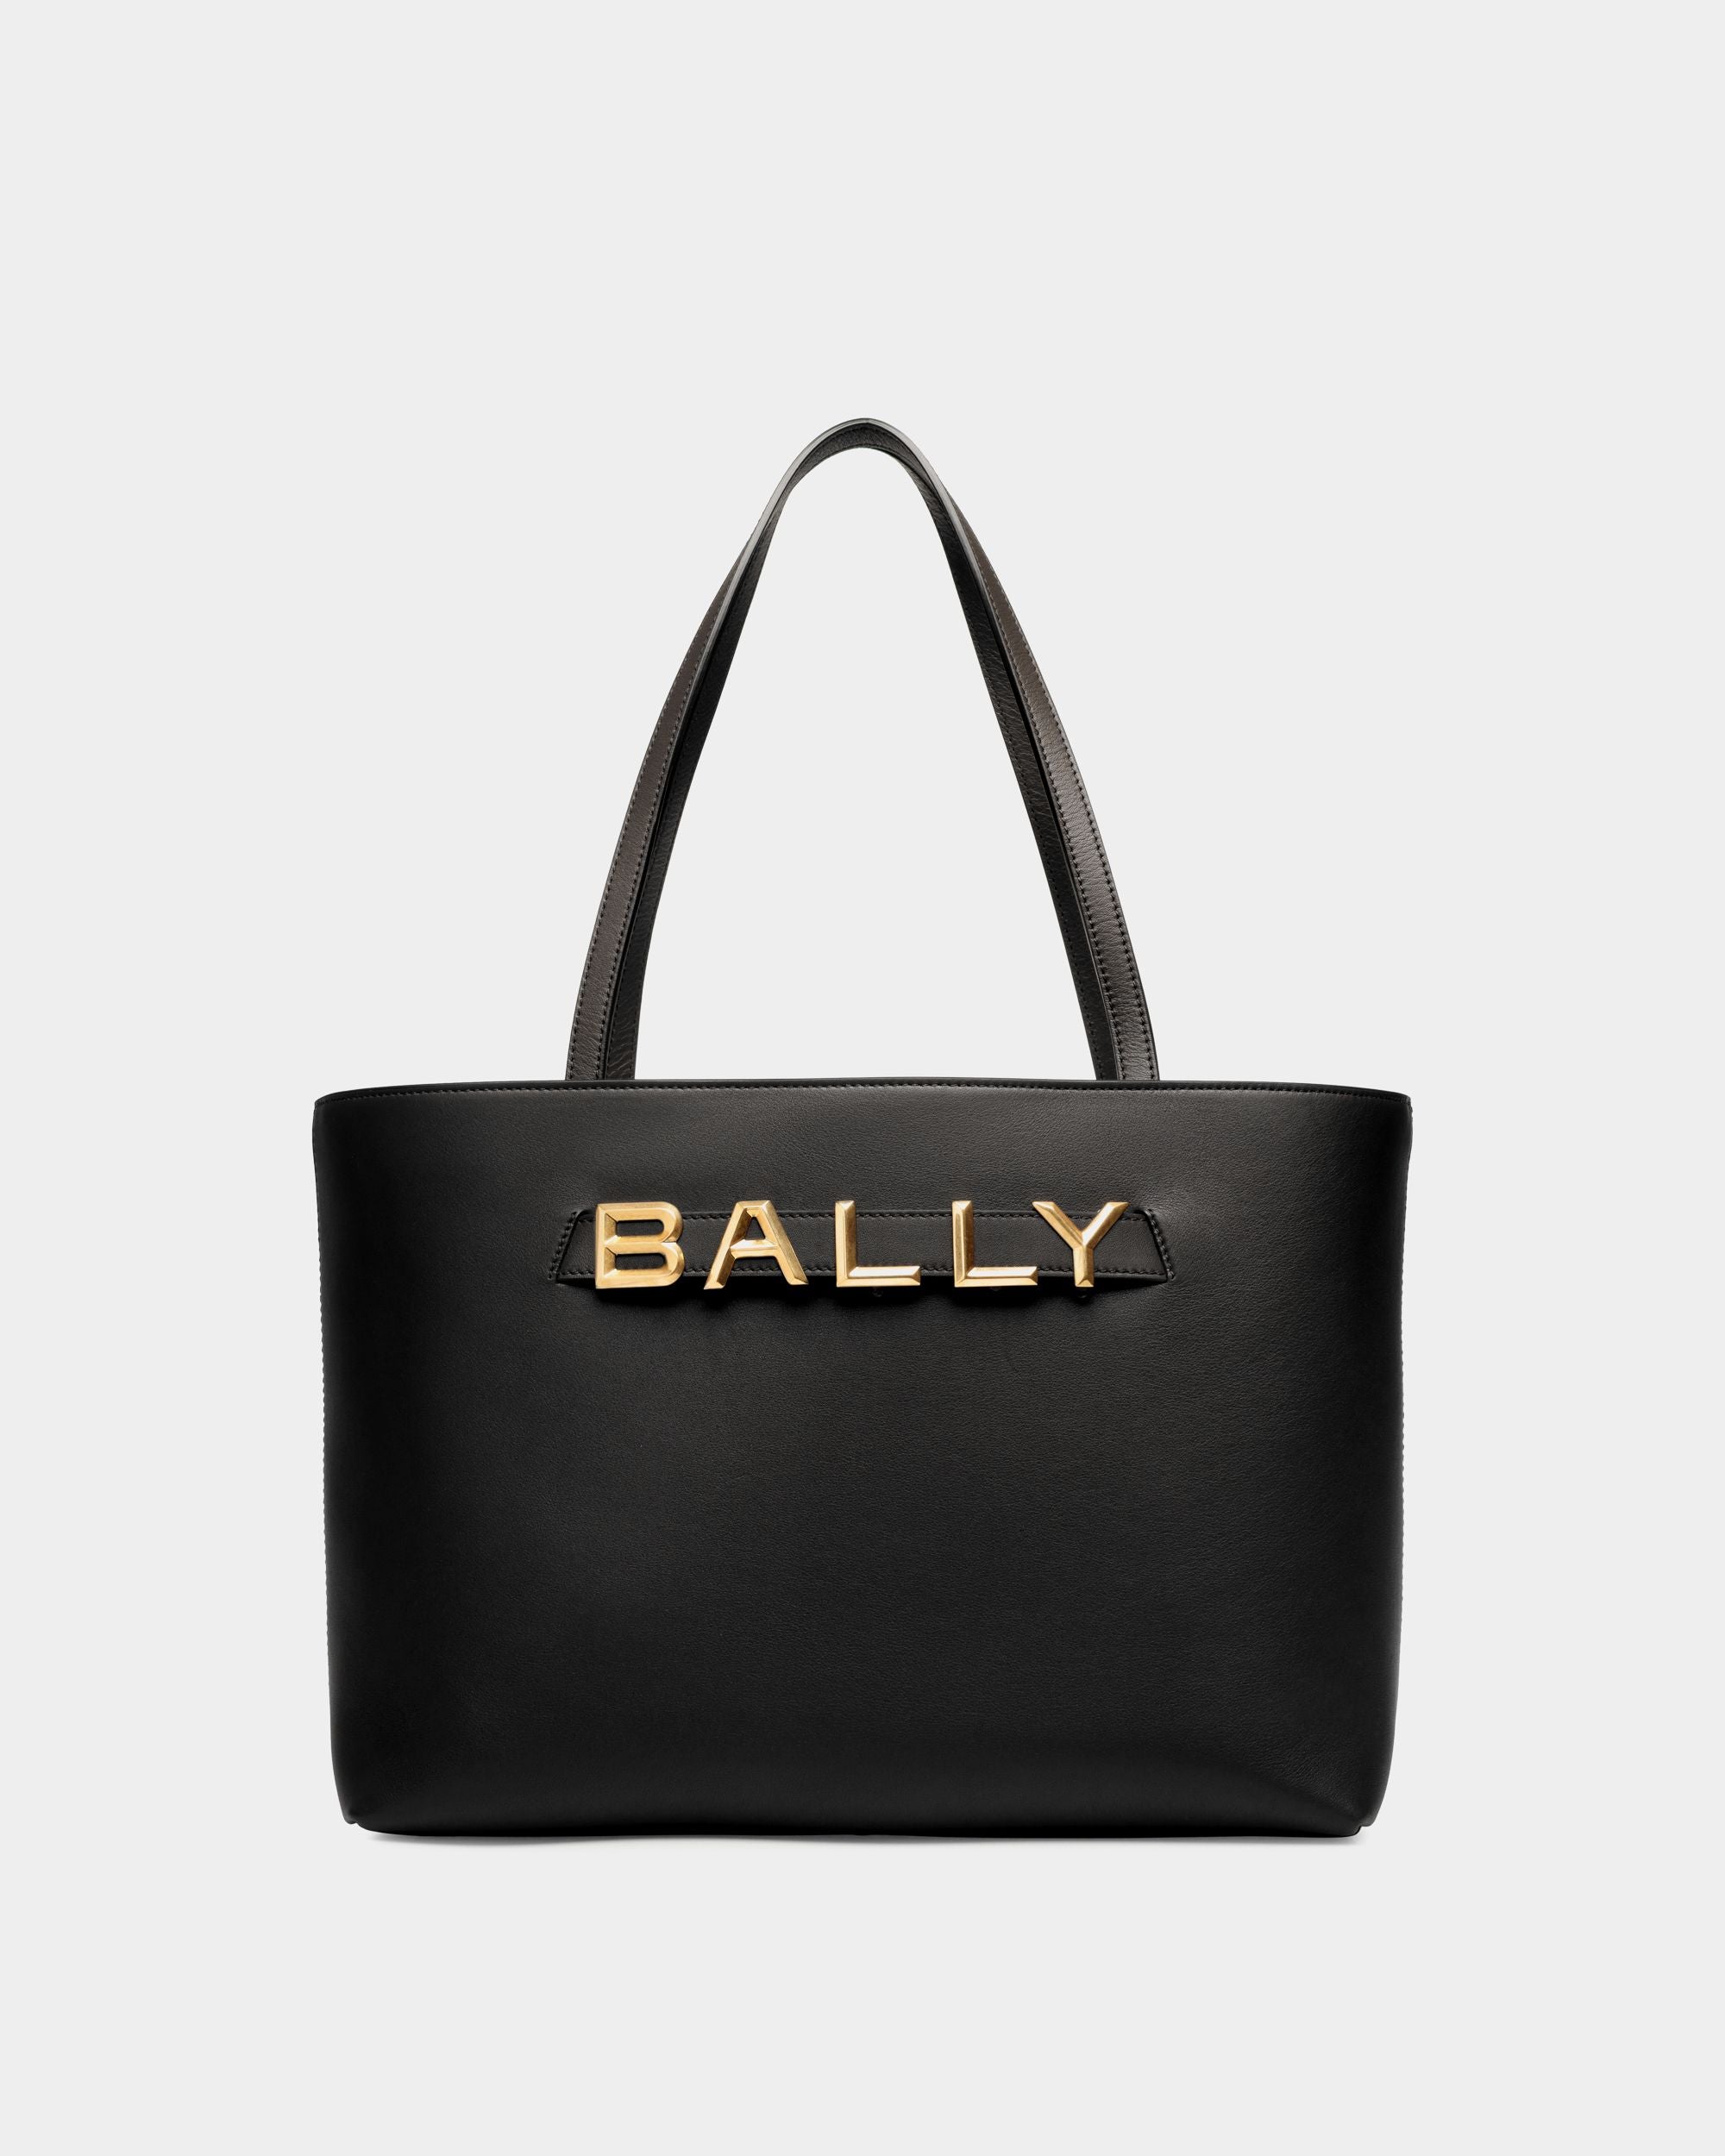 Bally Spell | Women's Tote Bag in Black Leather | Bally | Still Life Front